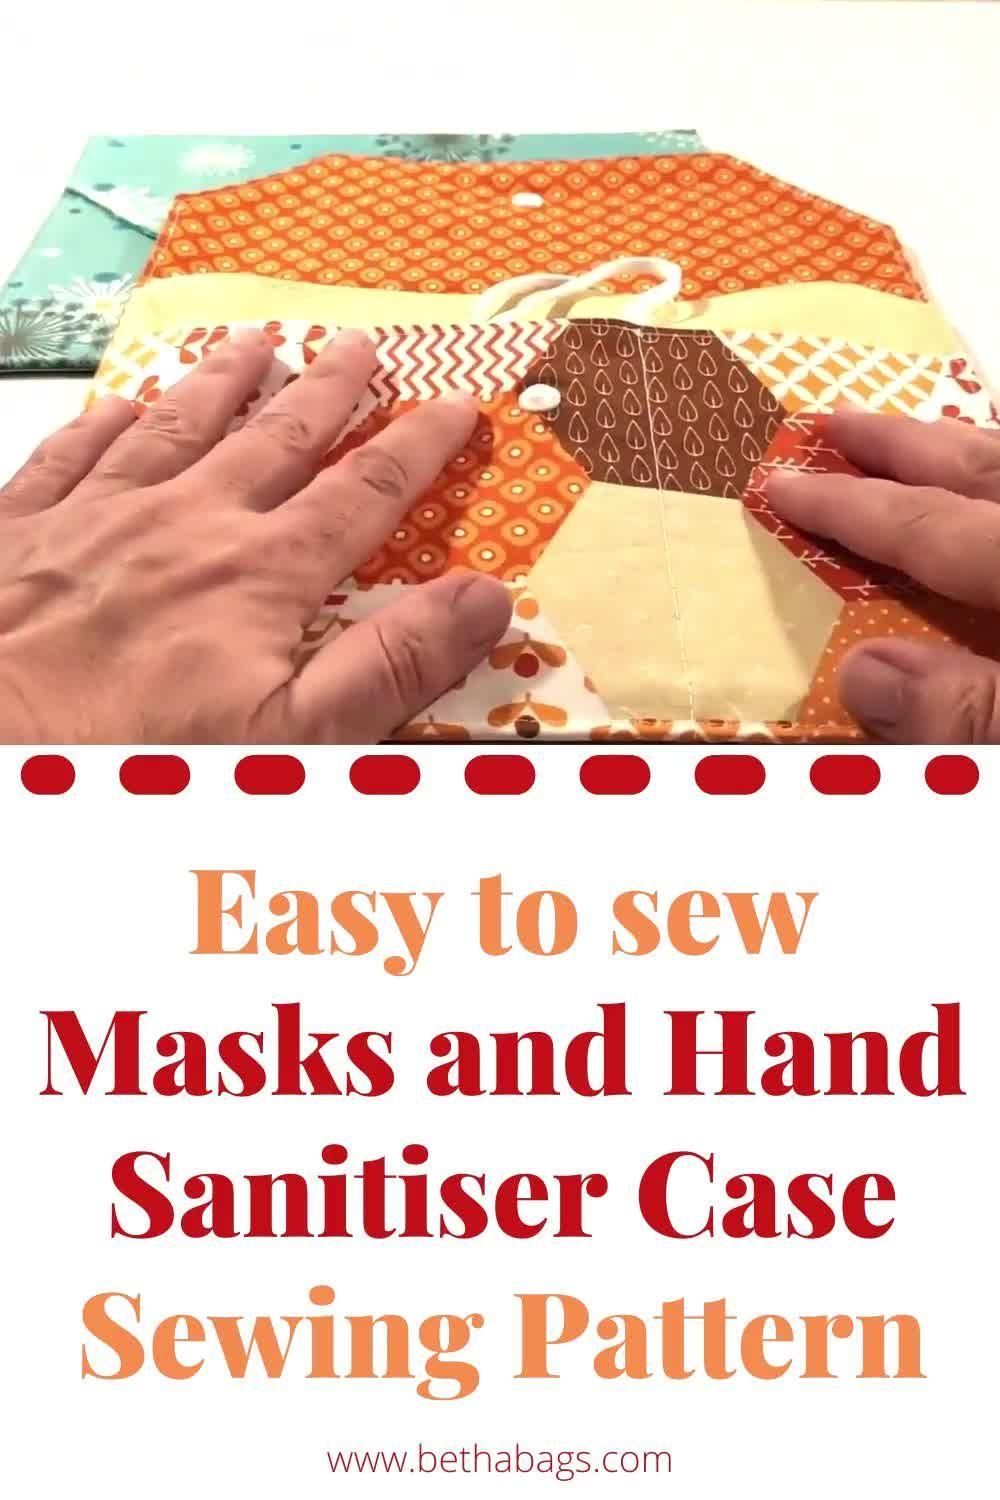 Masks and Hand Sanitiser Case Sewing Pattern PDF in A4 and | Etsy -   19 fabric crafts diy free pattern ideas